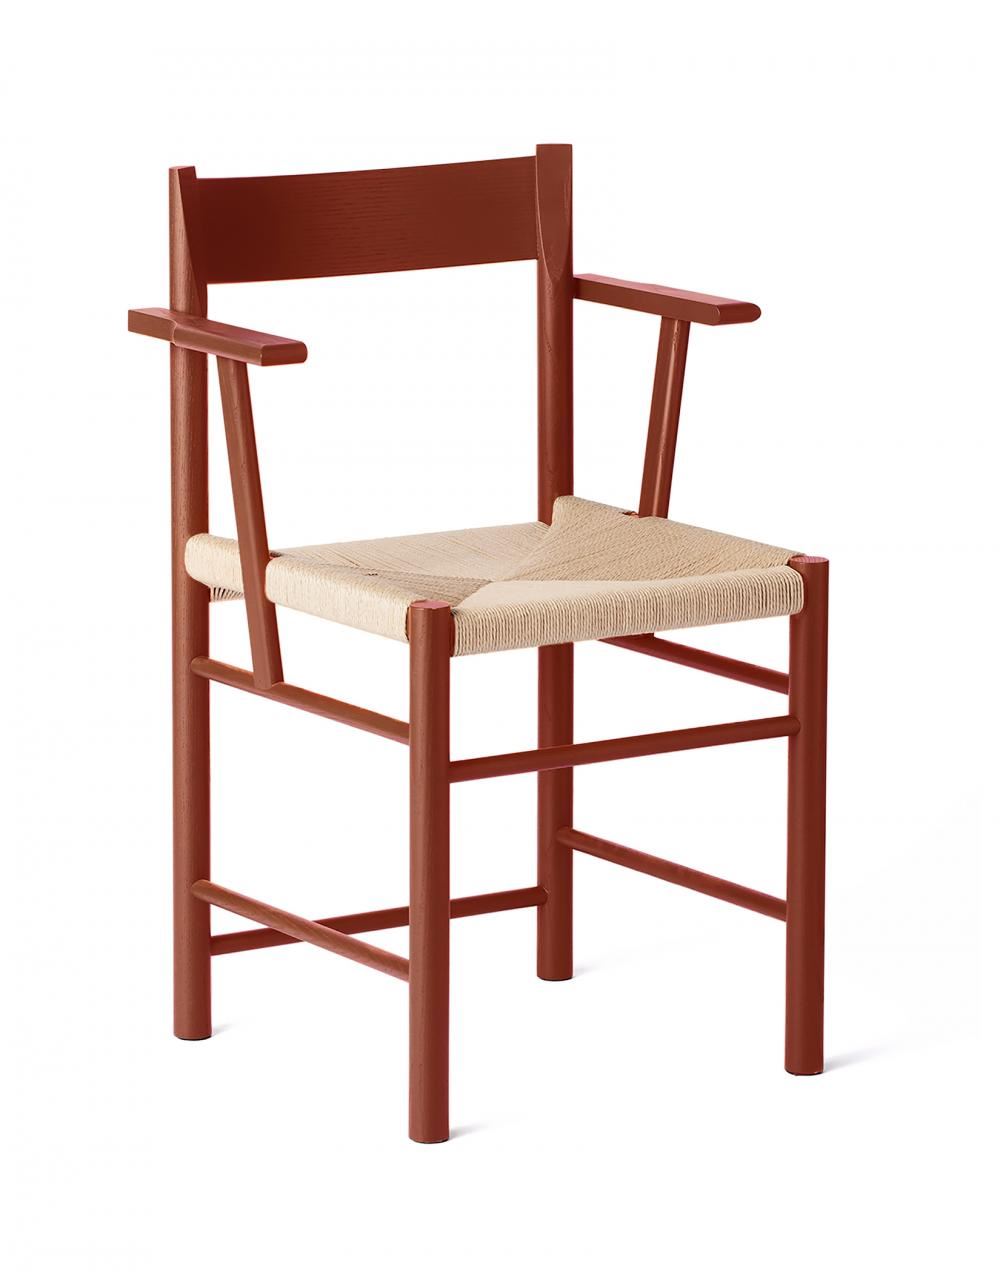 F Dining Chair Red Painted Ash Natural Paper Cord Weaved Seat Without Armrest